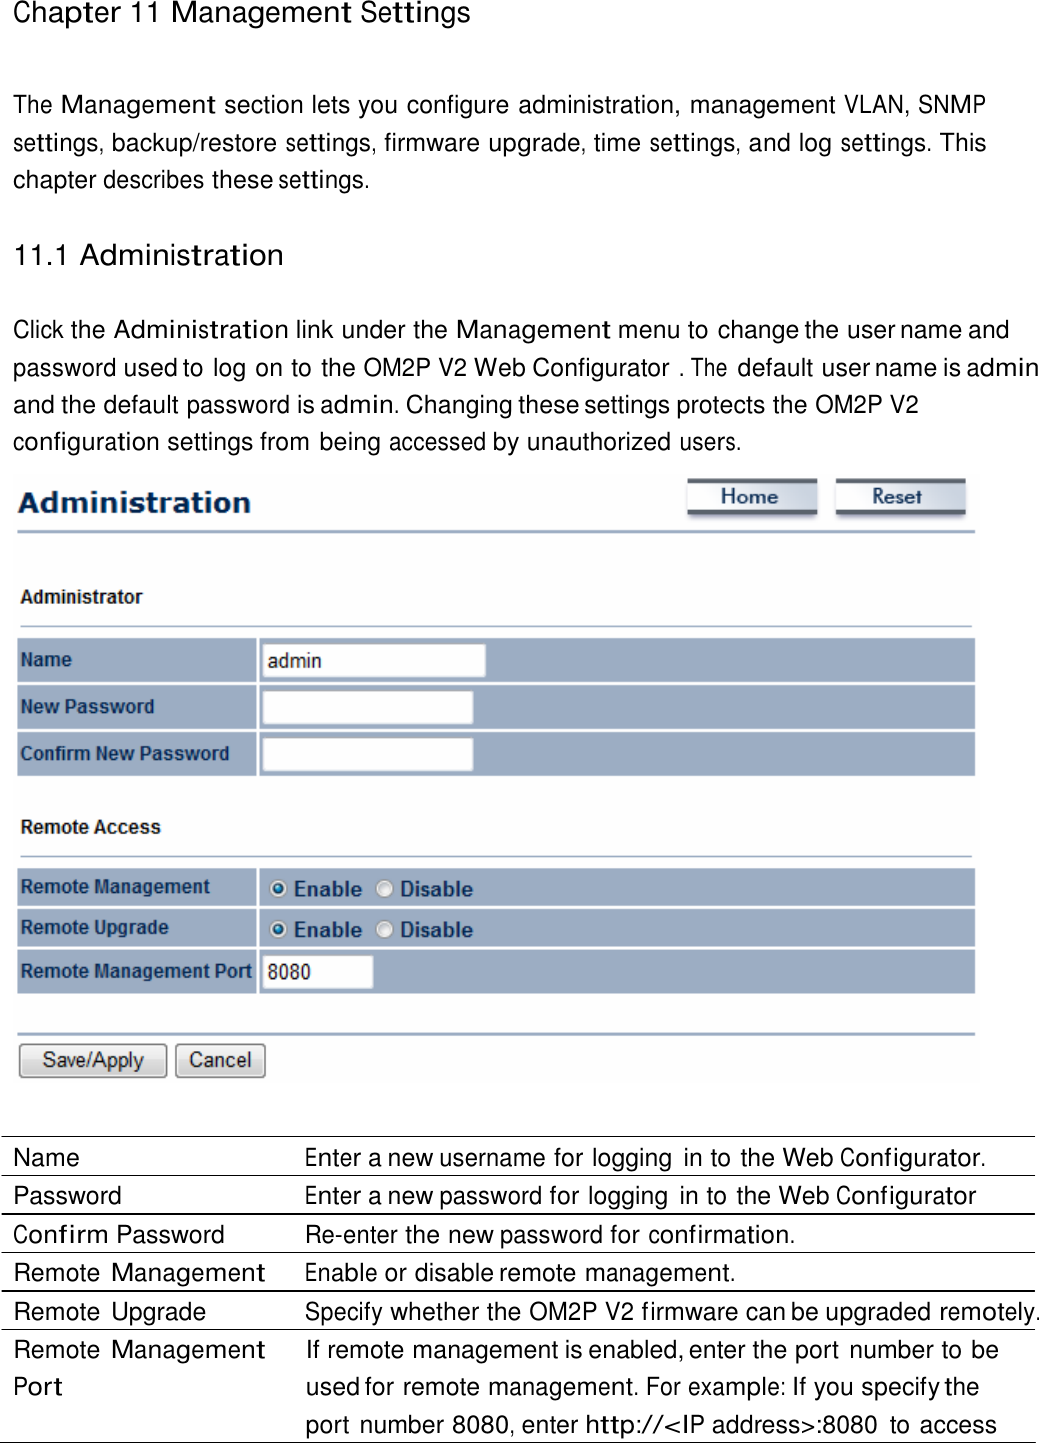 Chapter 11 Management Settings     The Management section lets you configure administration, management VLAN, SNMP settings, backup/restore settings, firmware upgrade, time settings, and log settings. This chapter describes these settings.   11.1 Administration   Click the Administration link under the Management menu to change the user name and password used to log on to the OM2P V2 Web Configurator . The default user name is admin and the default password is admin. Changing these settings protects the OM2P V2 configuration settings from being accessed by unauthorized users.     Name  Enter a new username for logging  in to the Web Configurator. Password  Enter a new password for logging  in to the Web Configurator Confirm Password  Re-enter the new password for confirmation. Remote Management Enable or disable remote management. Remote Upgrade  Specify whether the OM2P V2 firmware can be upgraded remotely. Remote Management Port If remote management is enabled, enter the port number to be used for remote management. For example: If you specify the port number 8080, enter http://&lt;IP address&gt;:8080  to access 